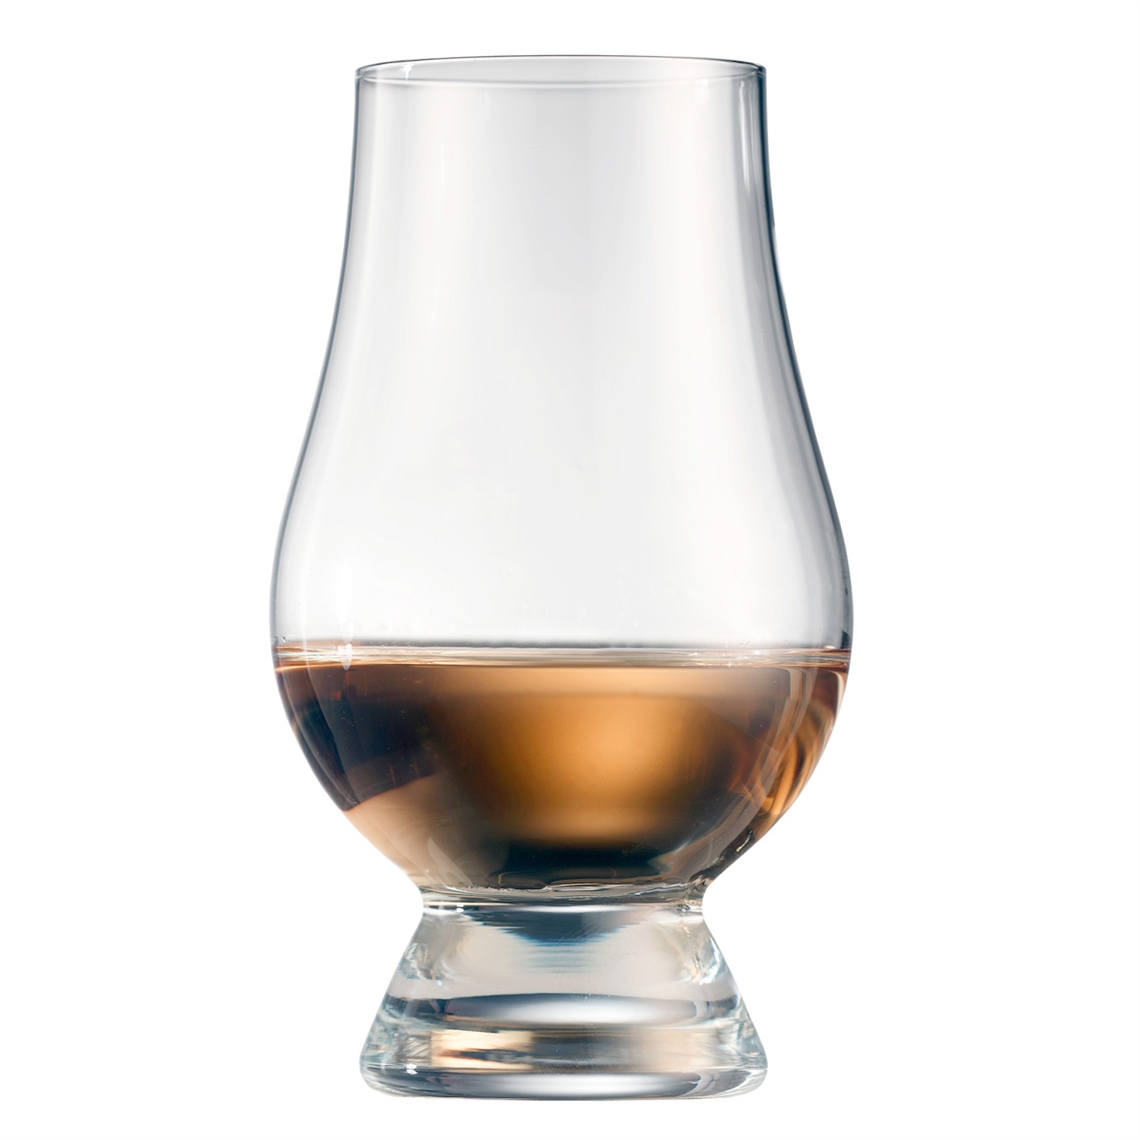 View more white wine glasses from our Whisky Glasses range